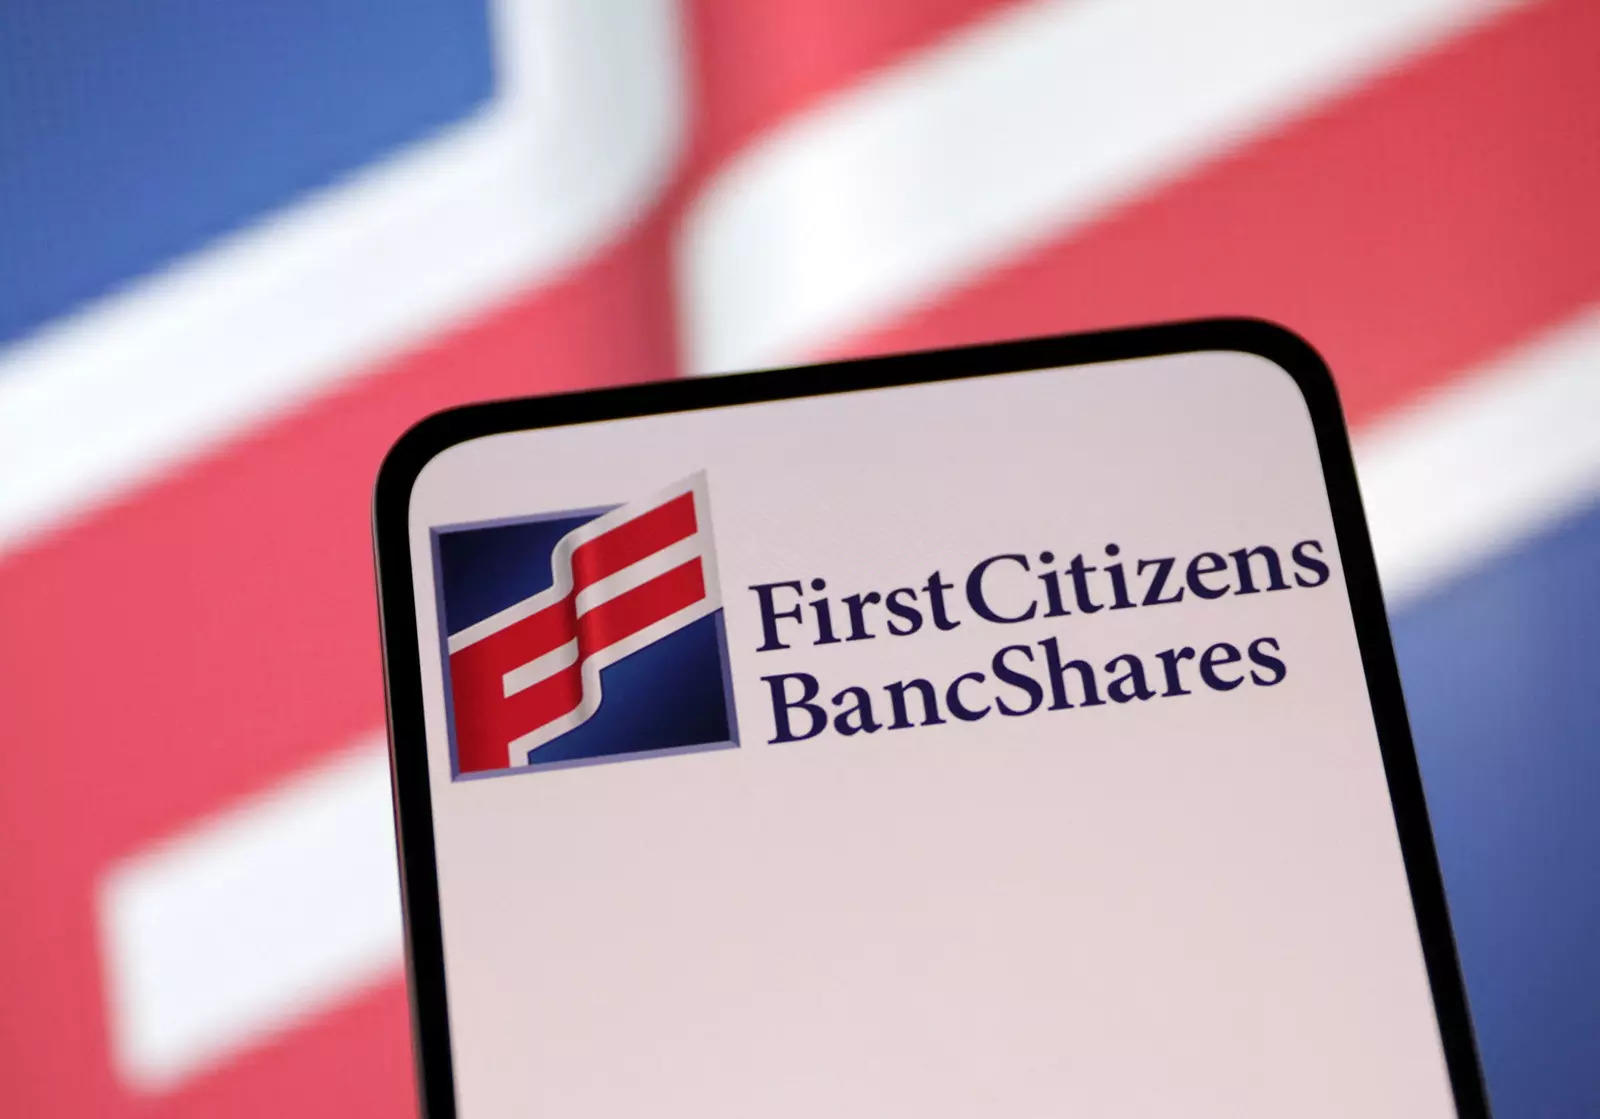 'First Citizens BancShares' Acquisition of Silicon Valley Bank Yields Impressive $9.8 Billion Gain